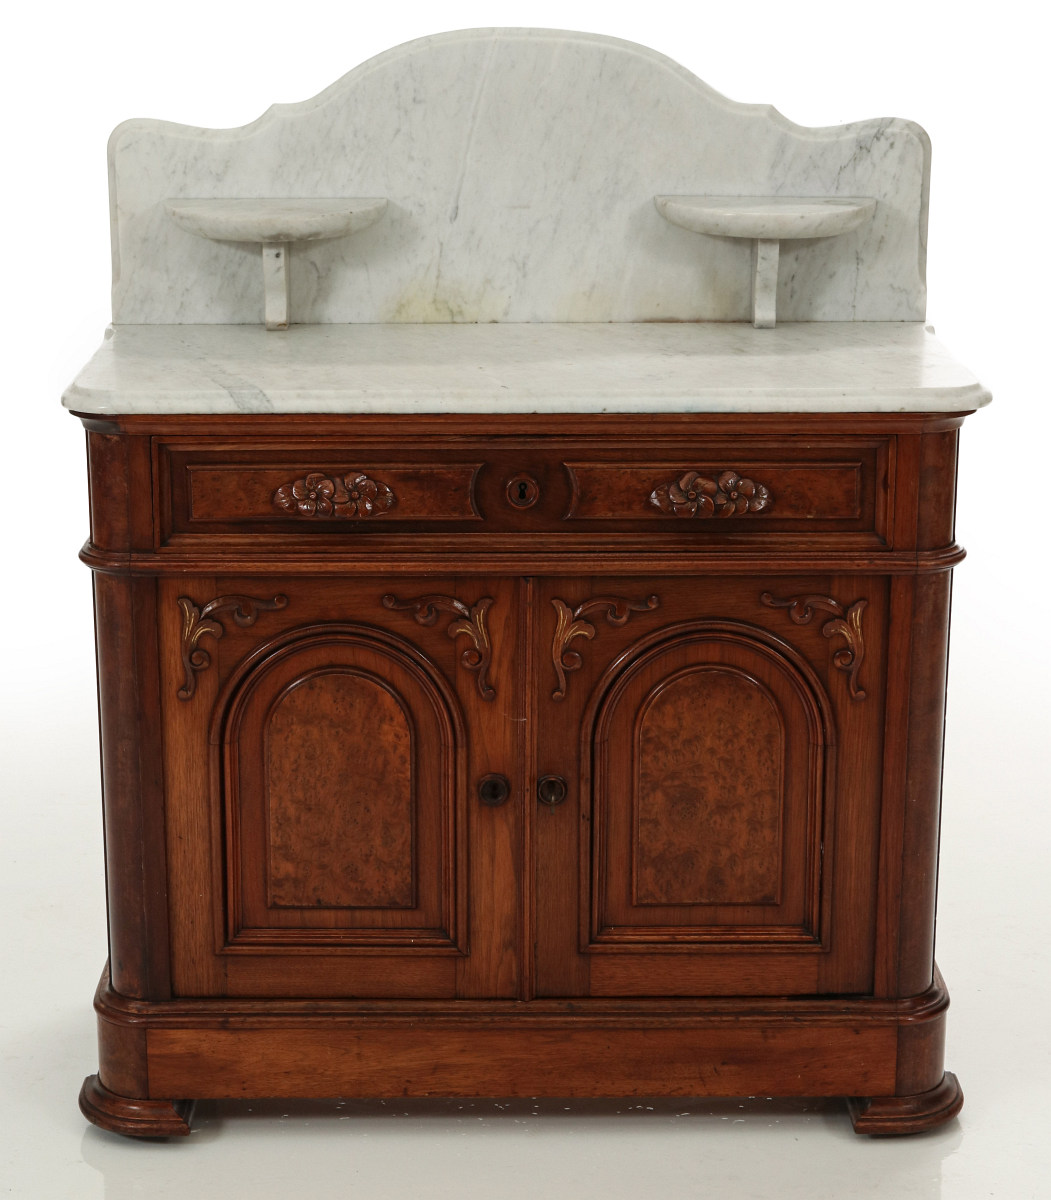 A 19TH C. AMERICAN GOTHIC INFLUENCE WASH STAND